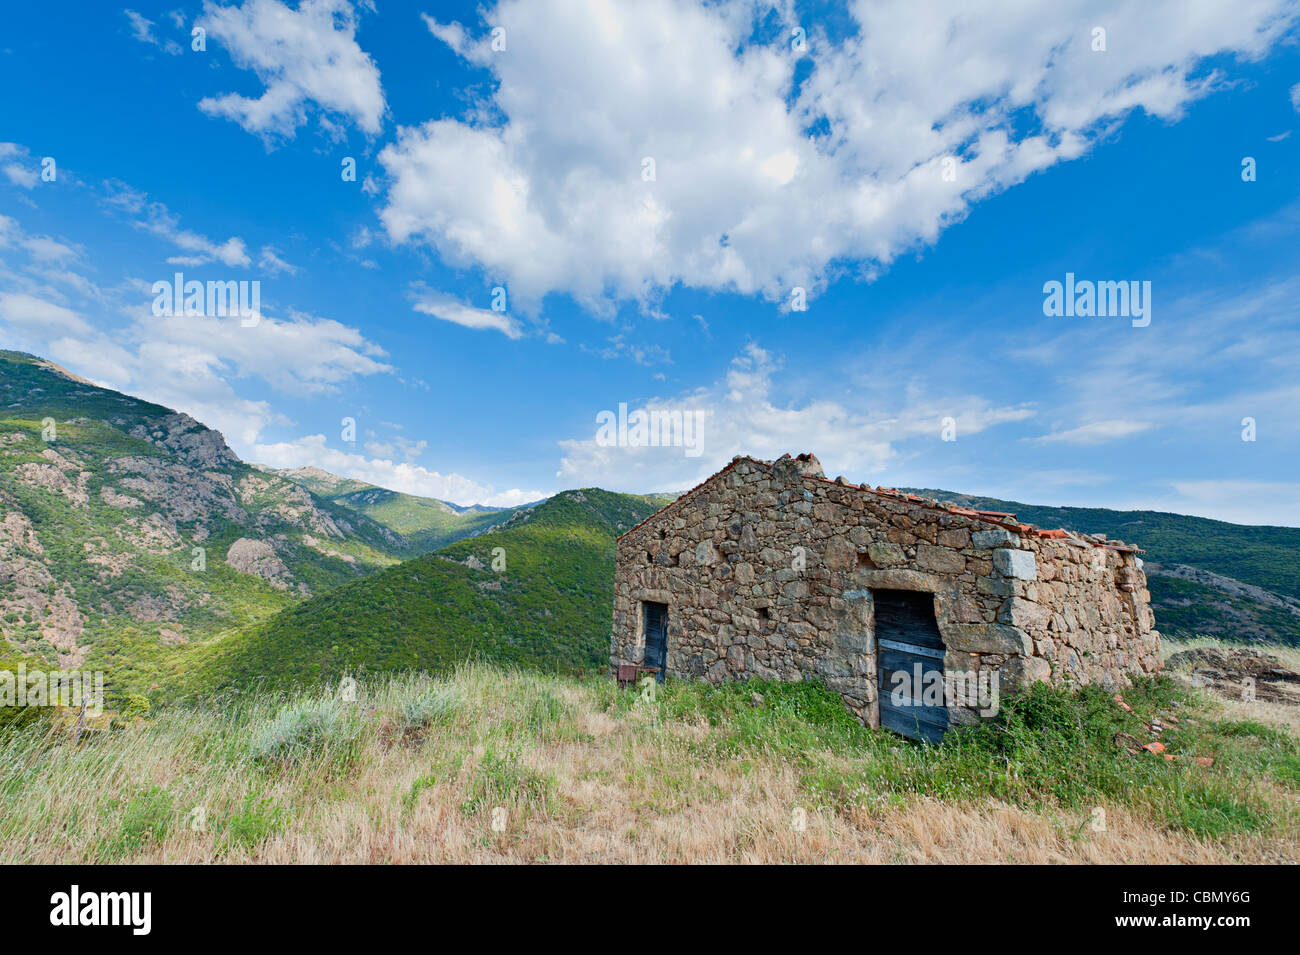 Abandoned shed on hill in Corsica, France Stock Photo